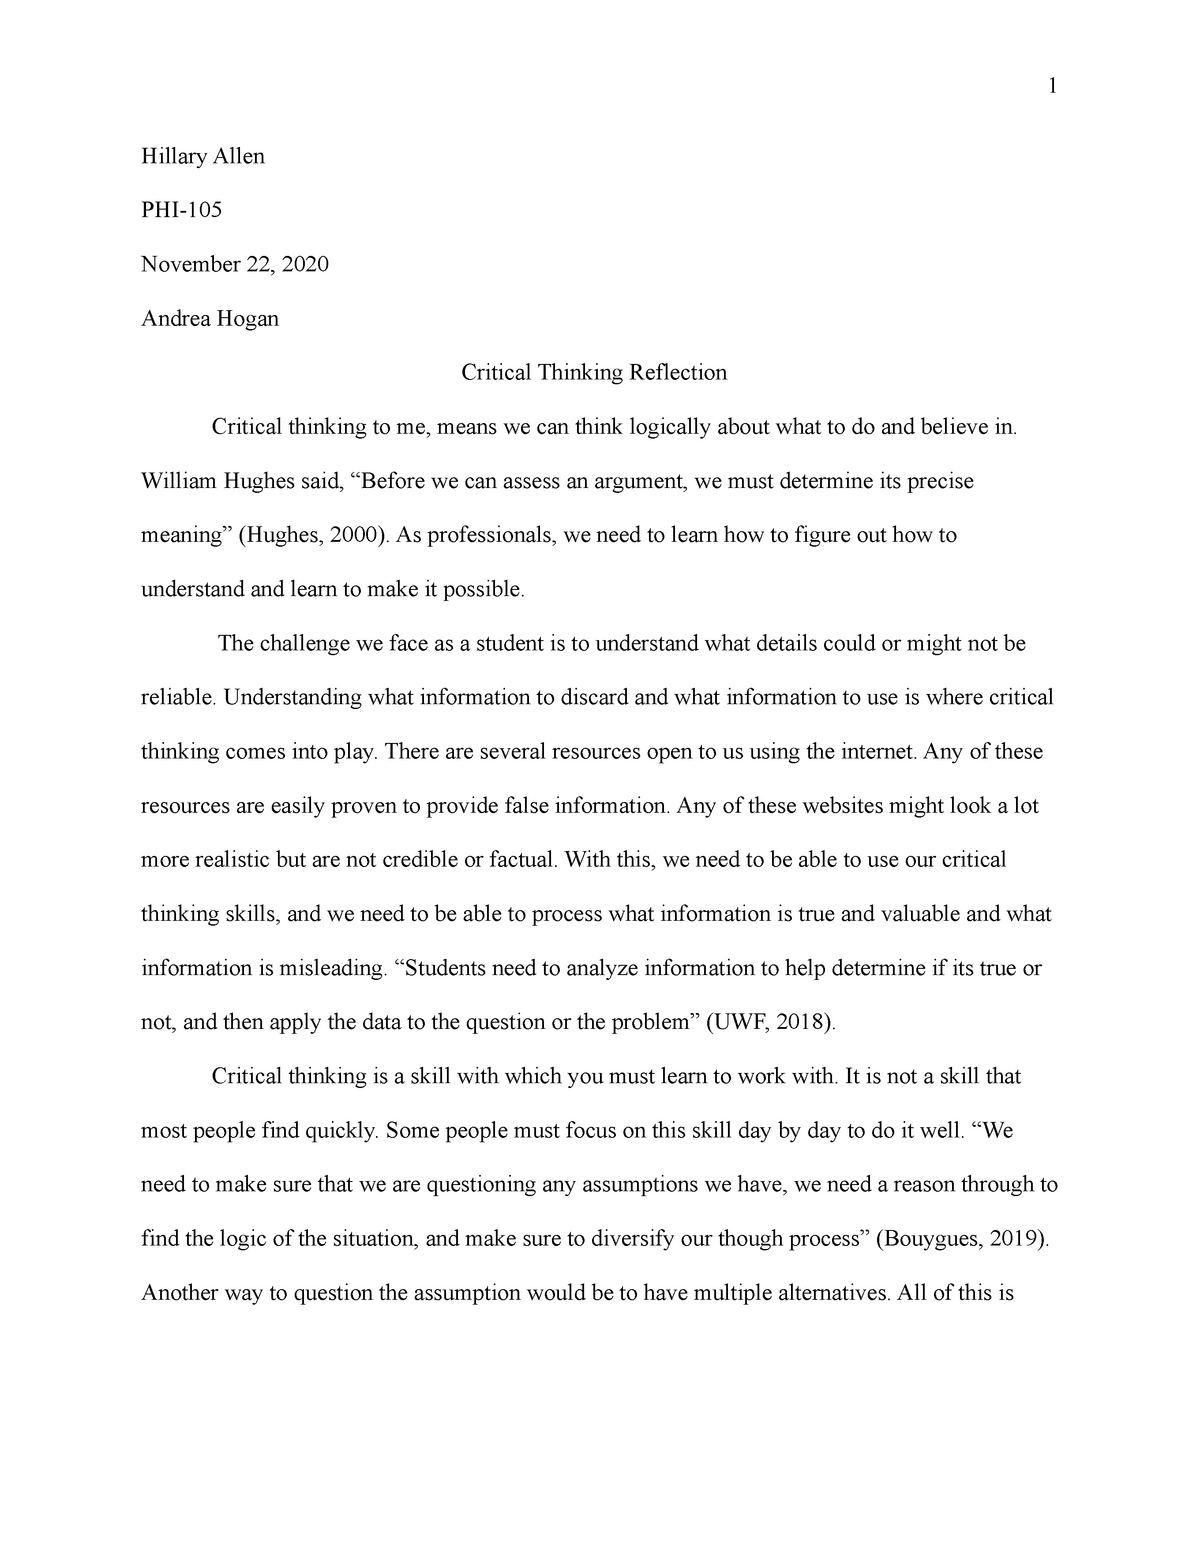 critical thinking essay conclusion